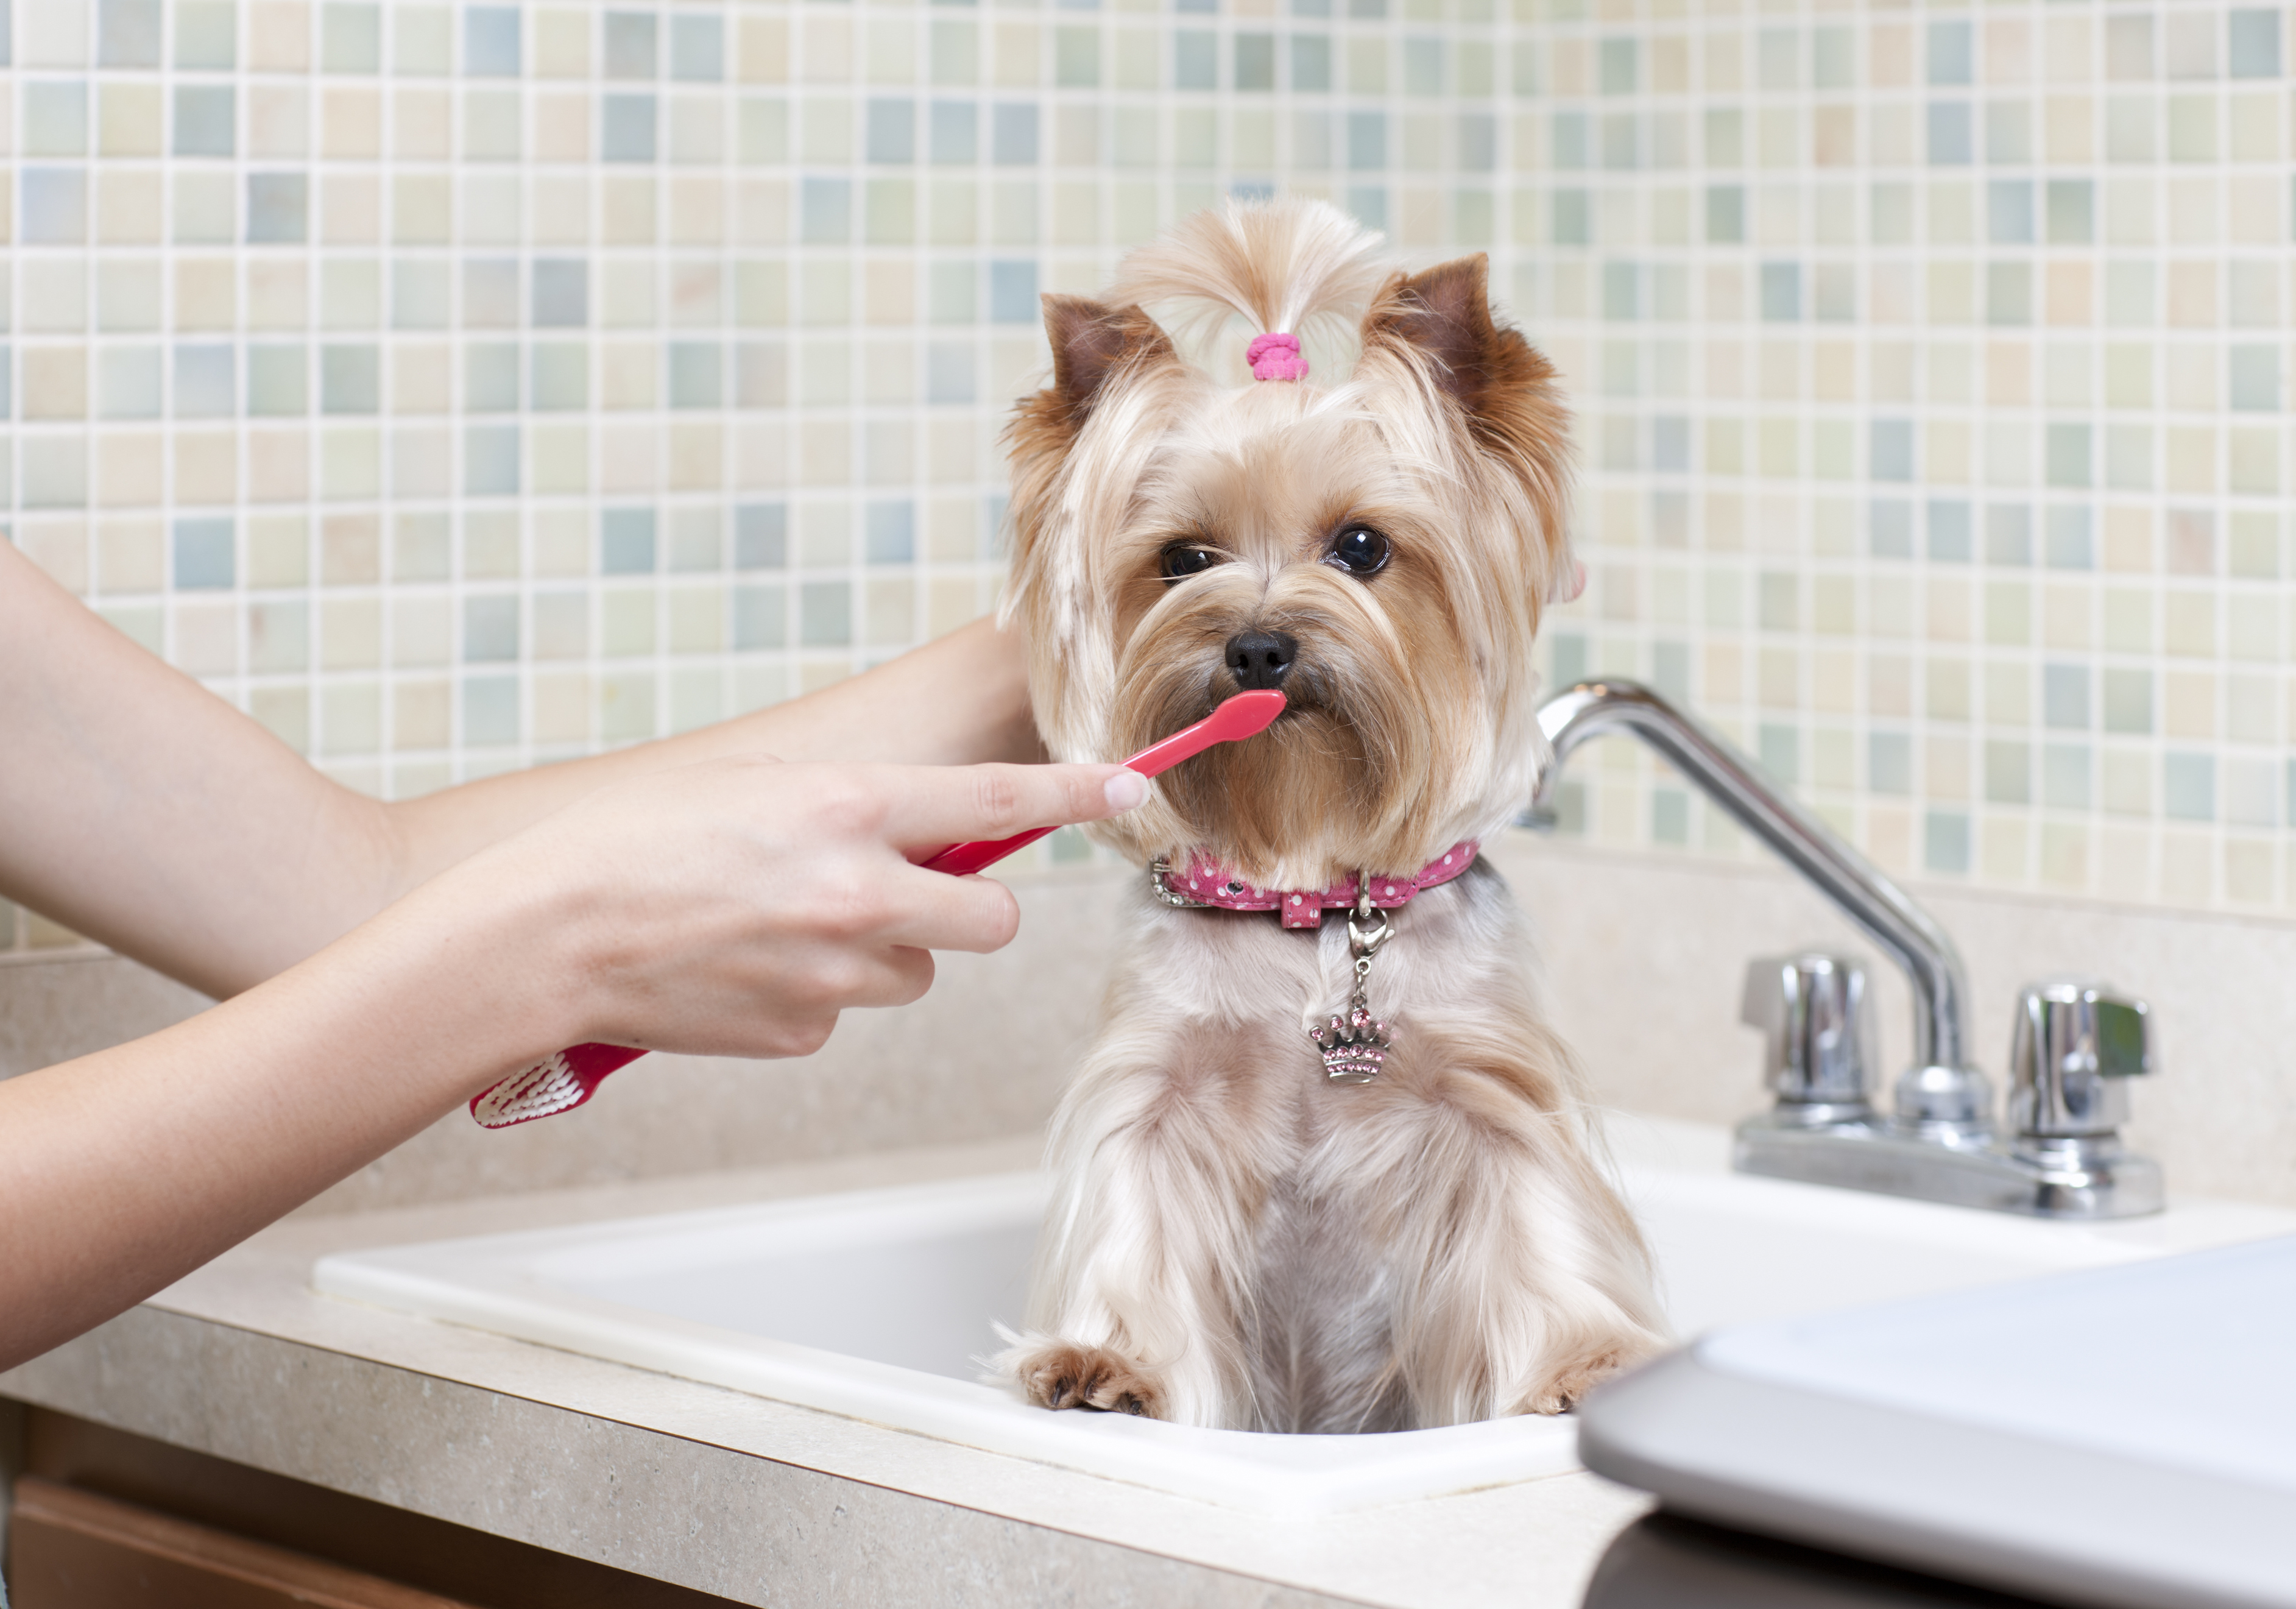 Doggy Dental Care: Tips to Help Care for Your Dog's Teeth ...